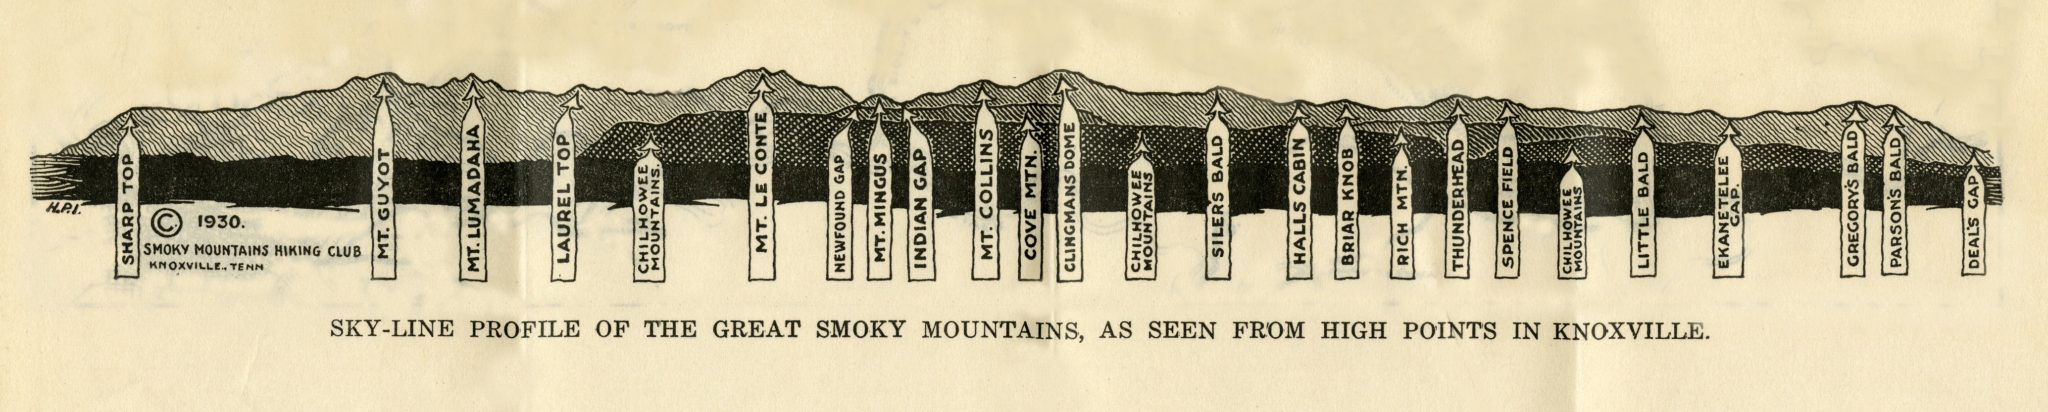 Sky-Line Profile of the mountain peaks by Harry Ijams, 1930. From a 1930s promotional brochure. (Paul James)